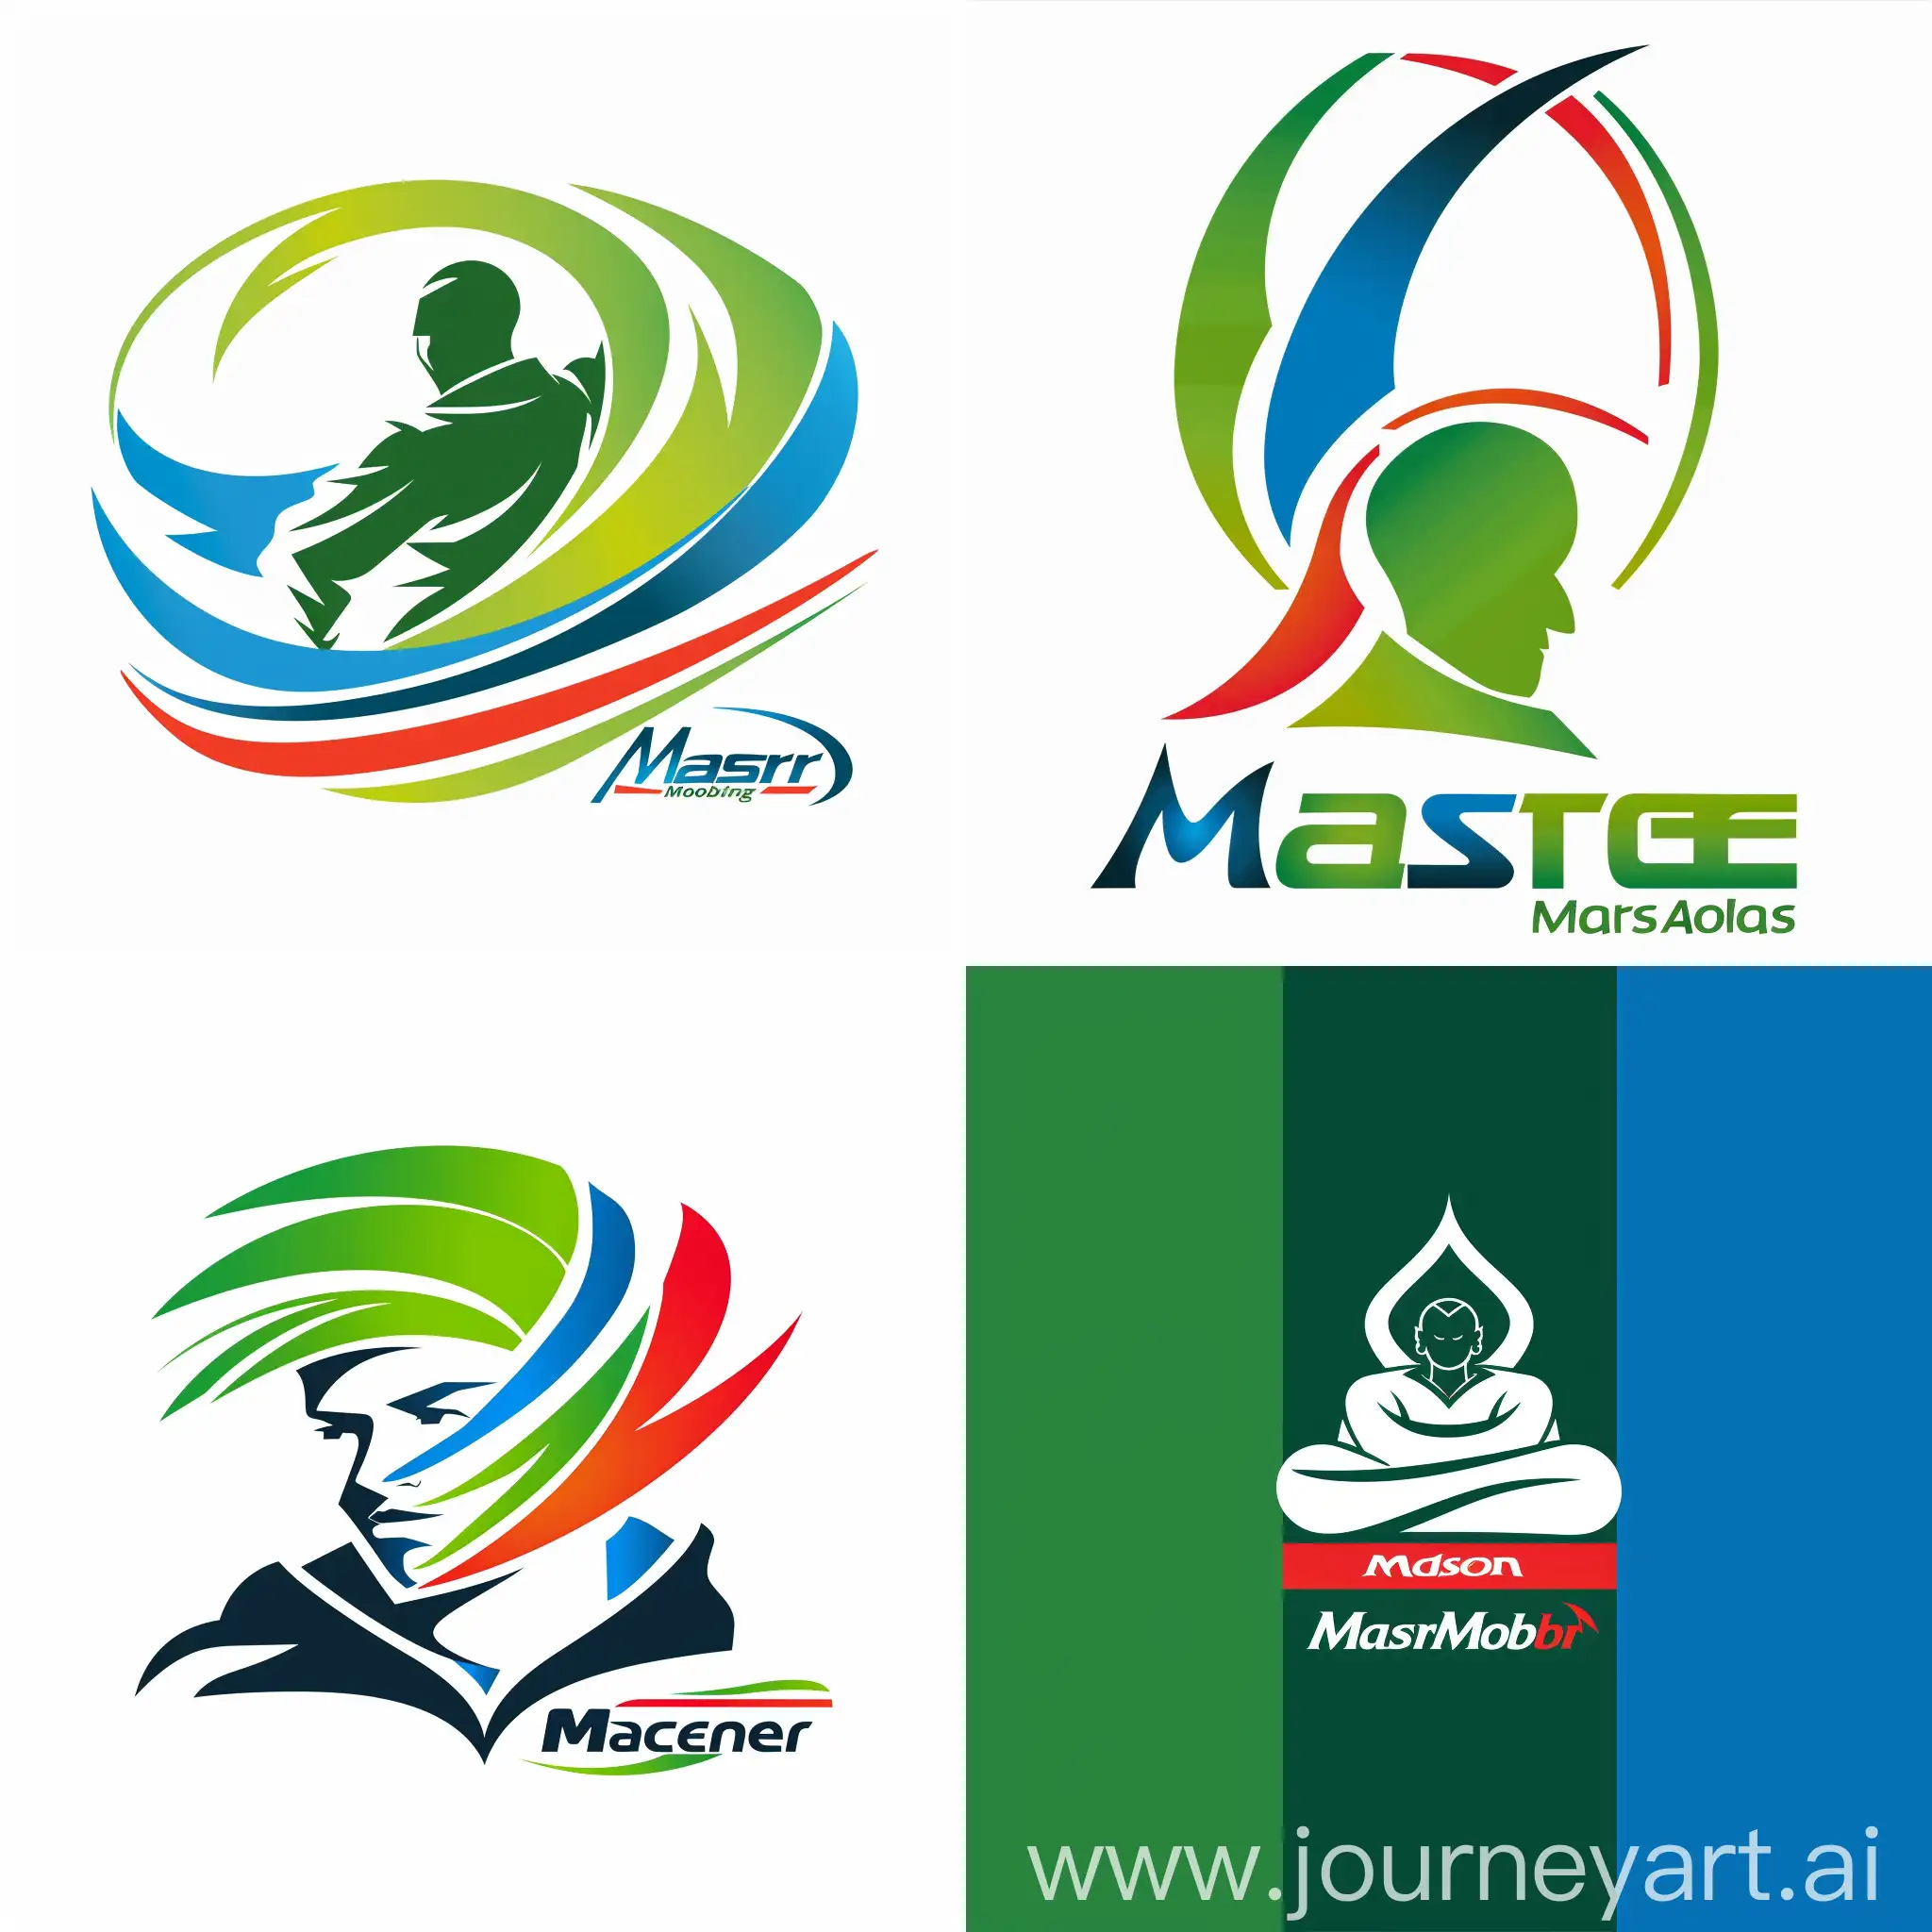 Master-Mobile-Computer-Store-Logo-with-Green-Blue-Red-and-White-Colors-Featuring-a-Master-Figure